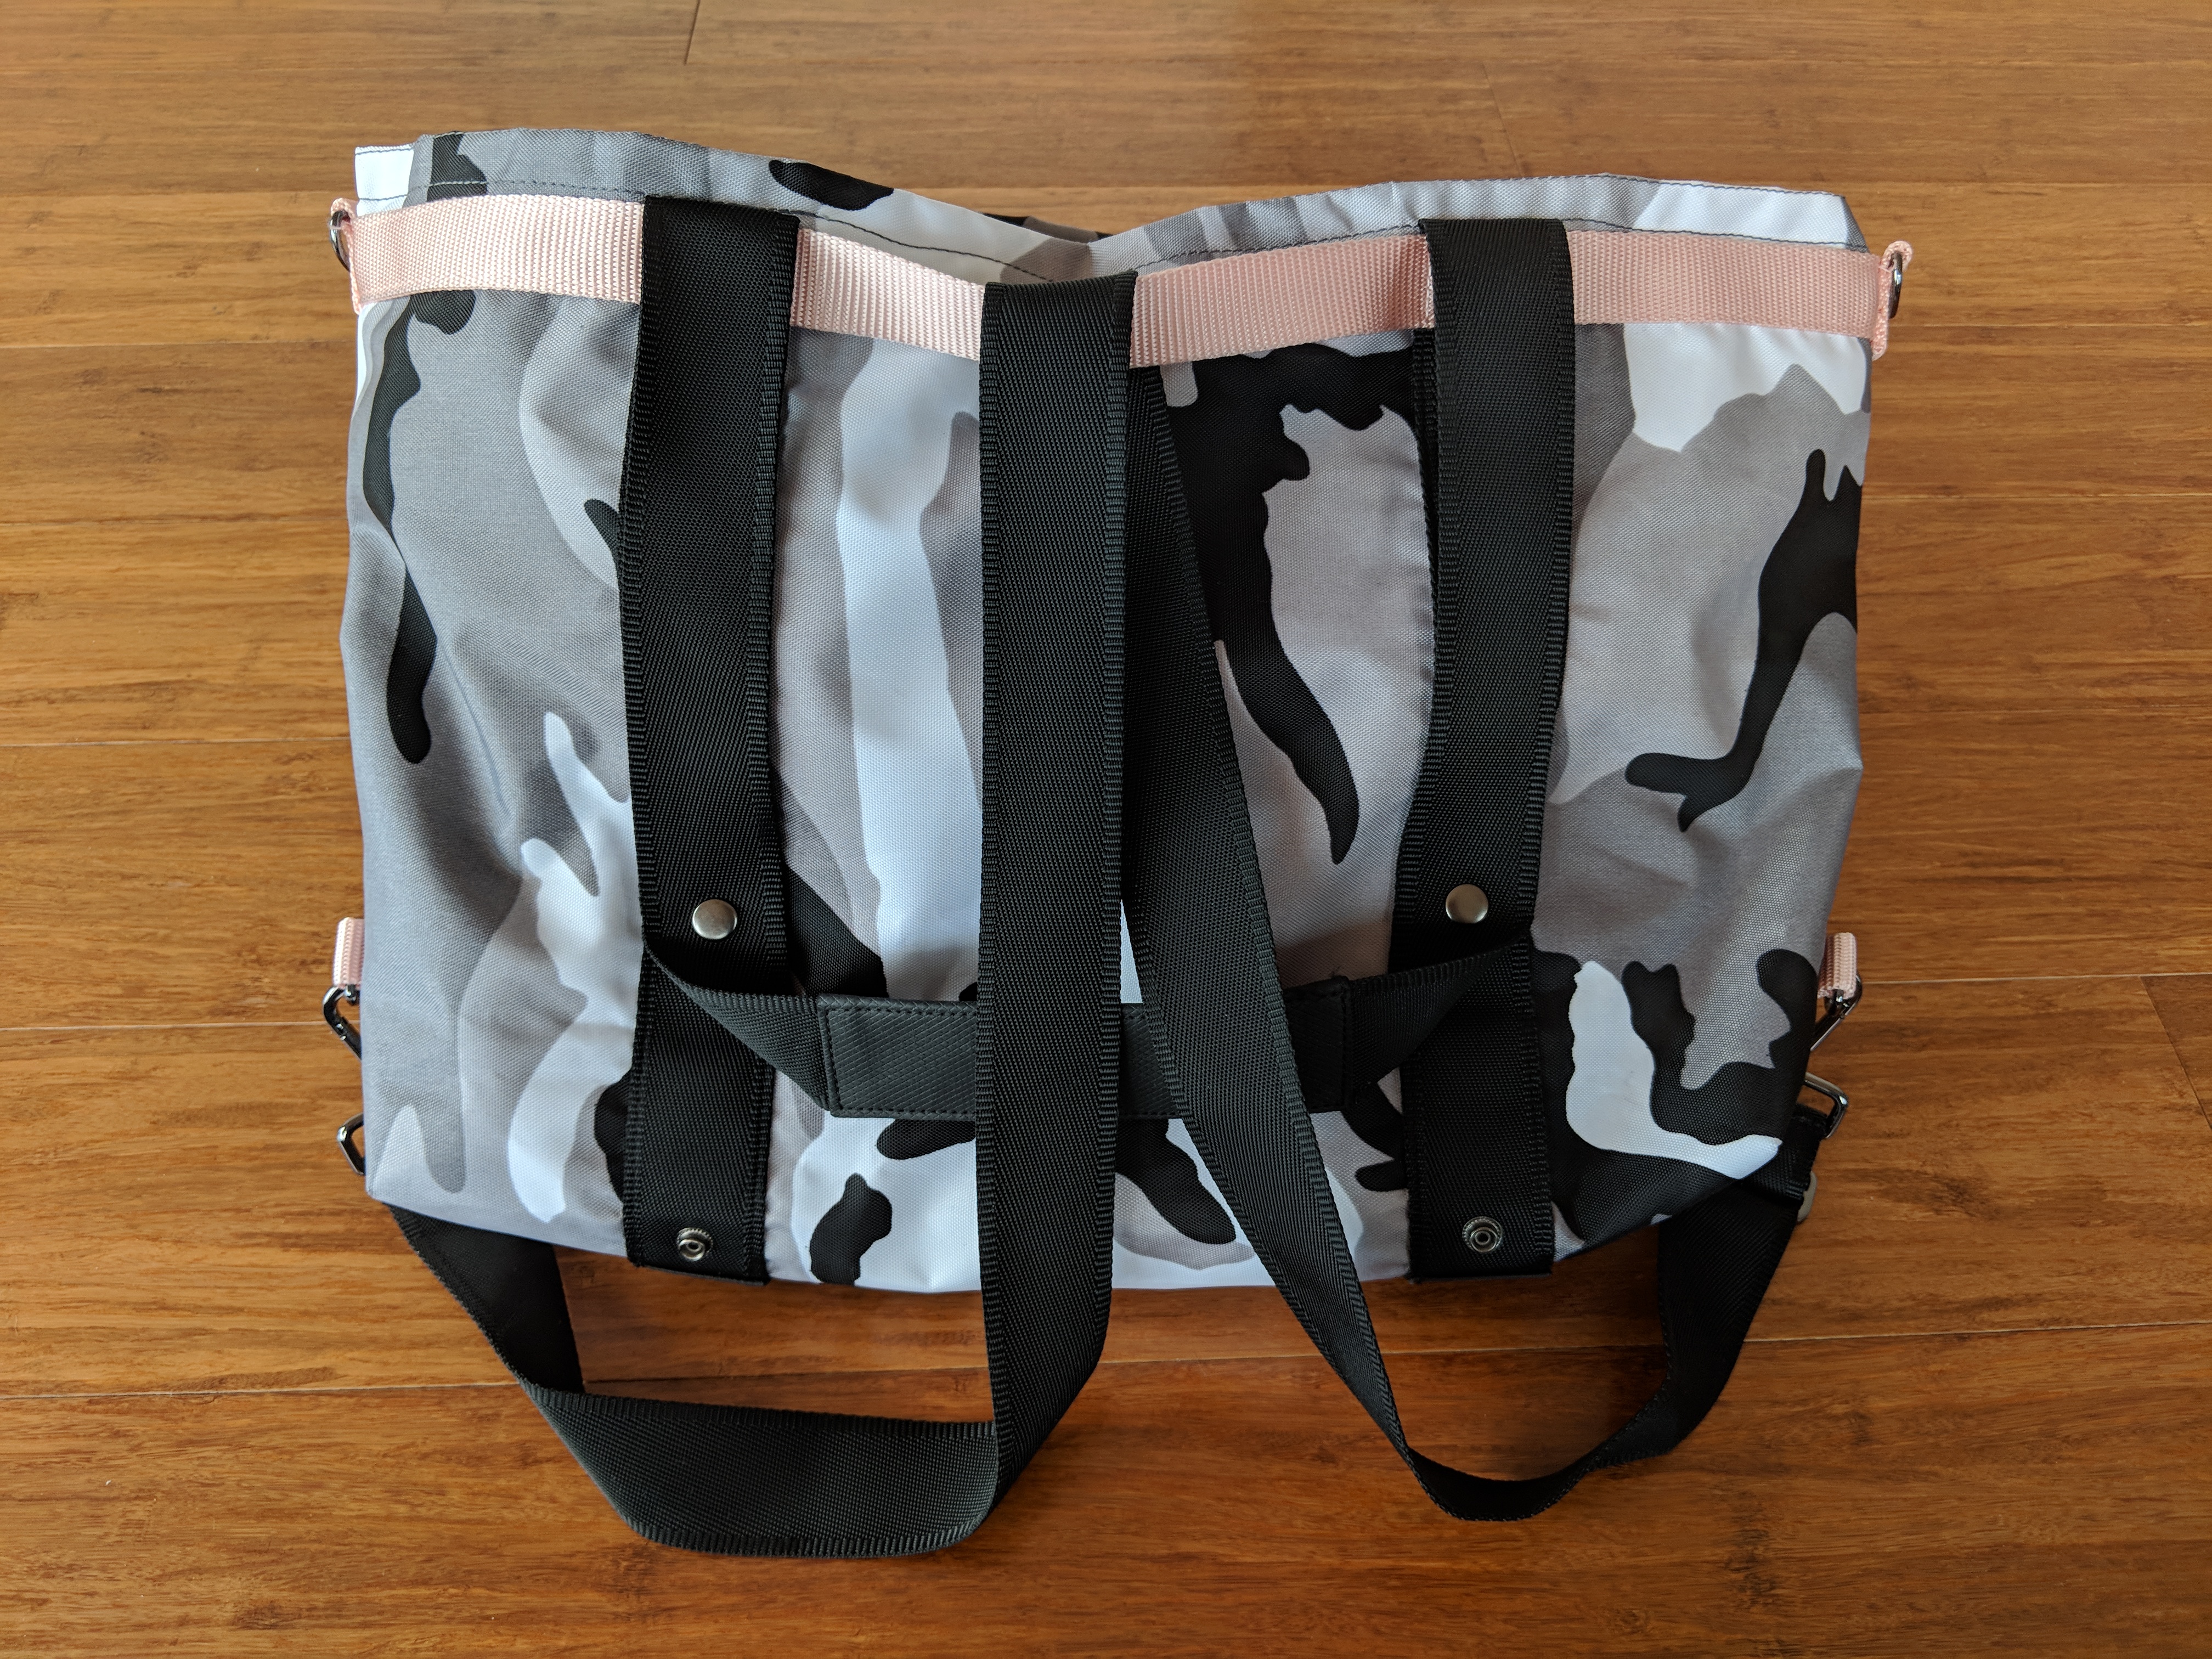 Andi Bag Review: Winter Camo and Quartz Pink backpack transformation